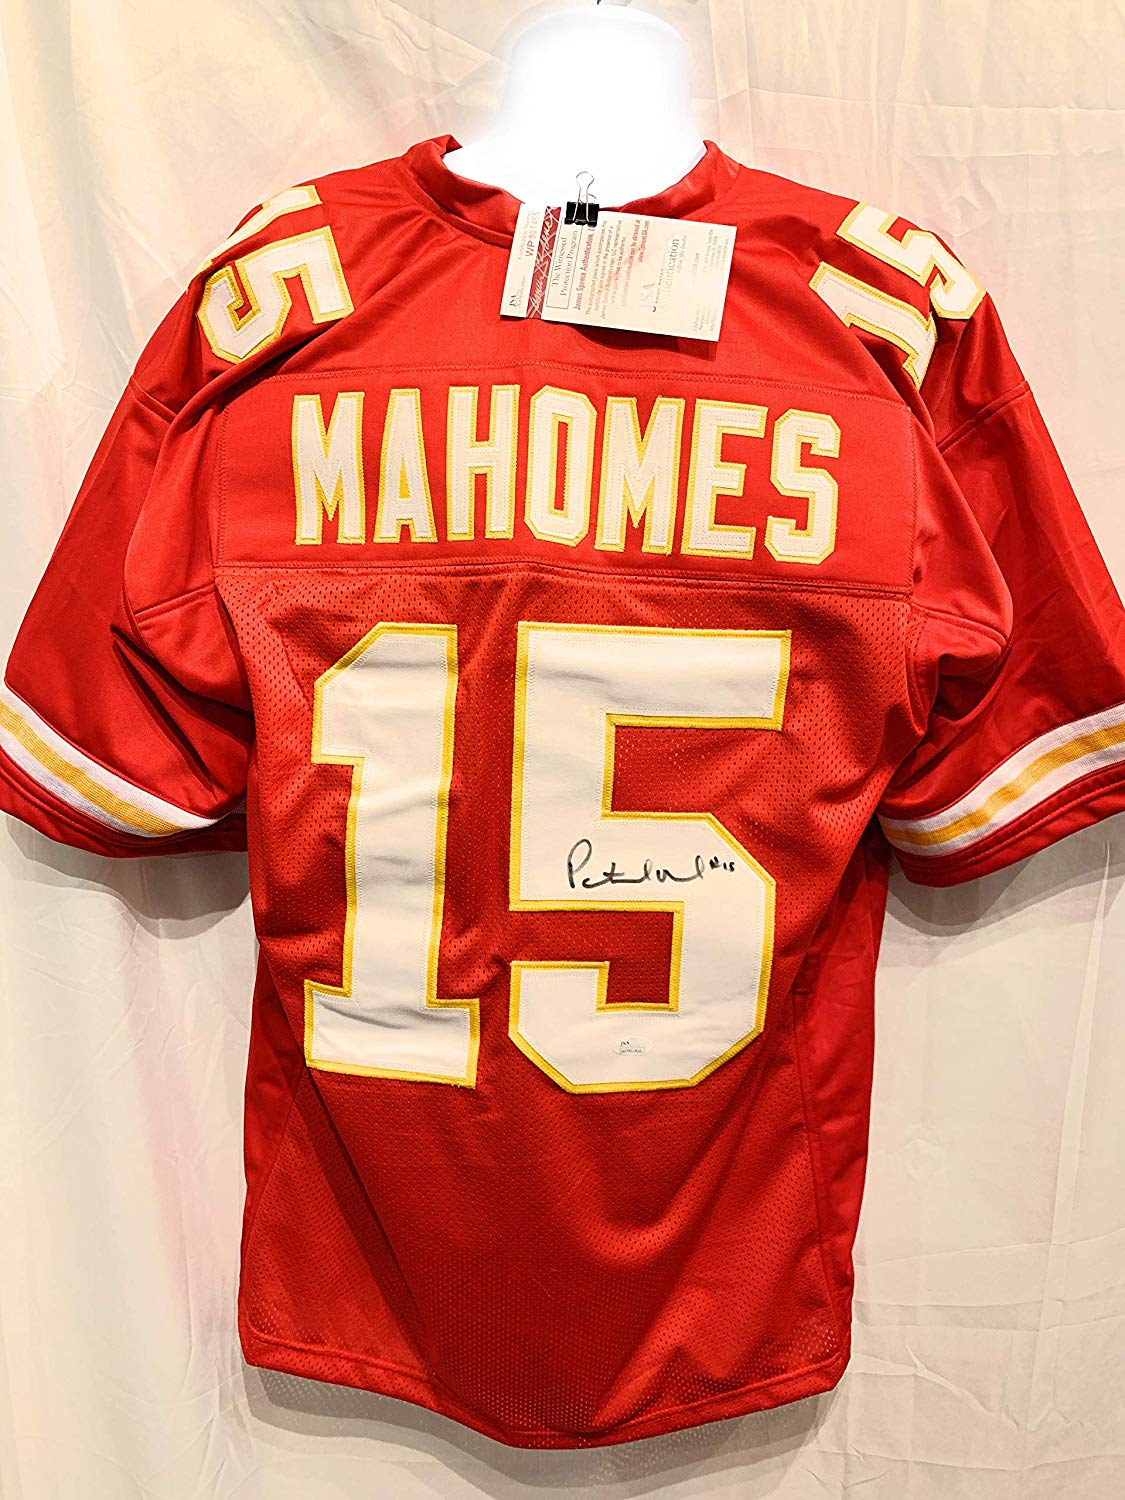 Patrick-Mahomes-Autographed-Jersey